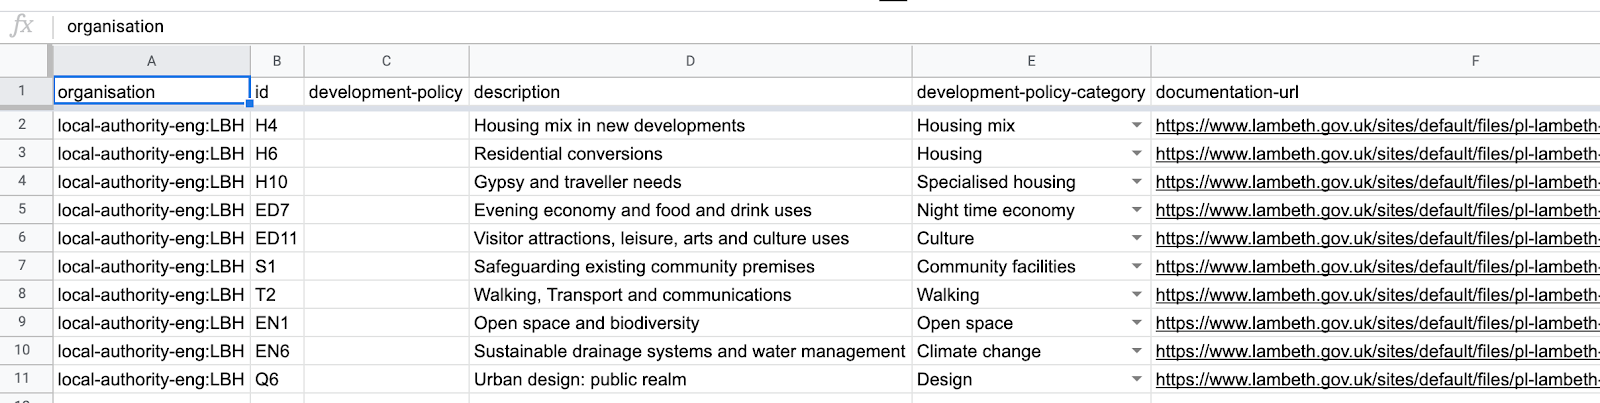 Spreadsheet listing policies that have been categorised